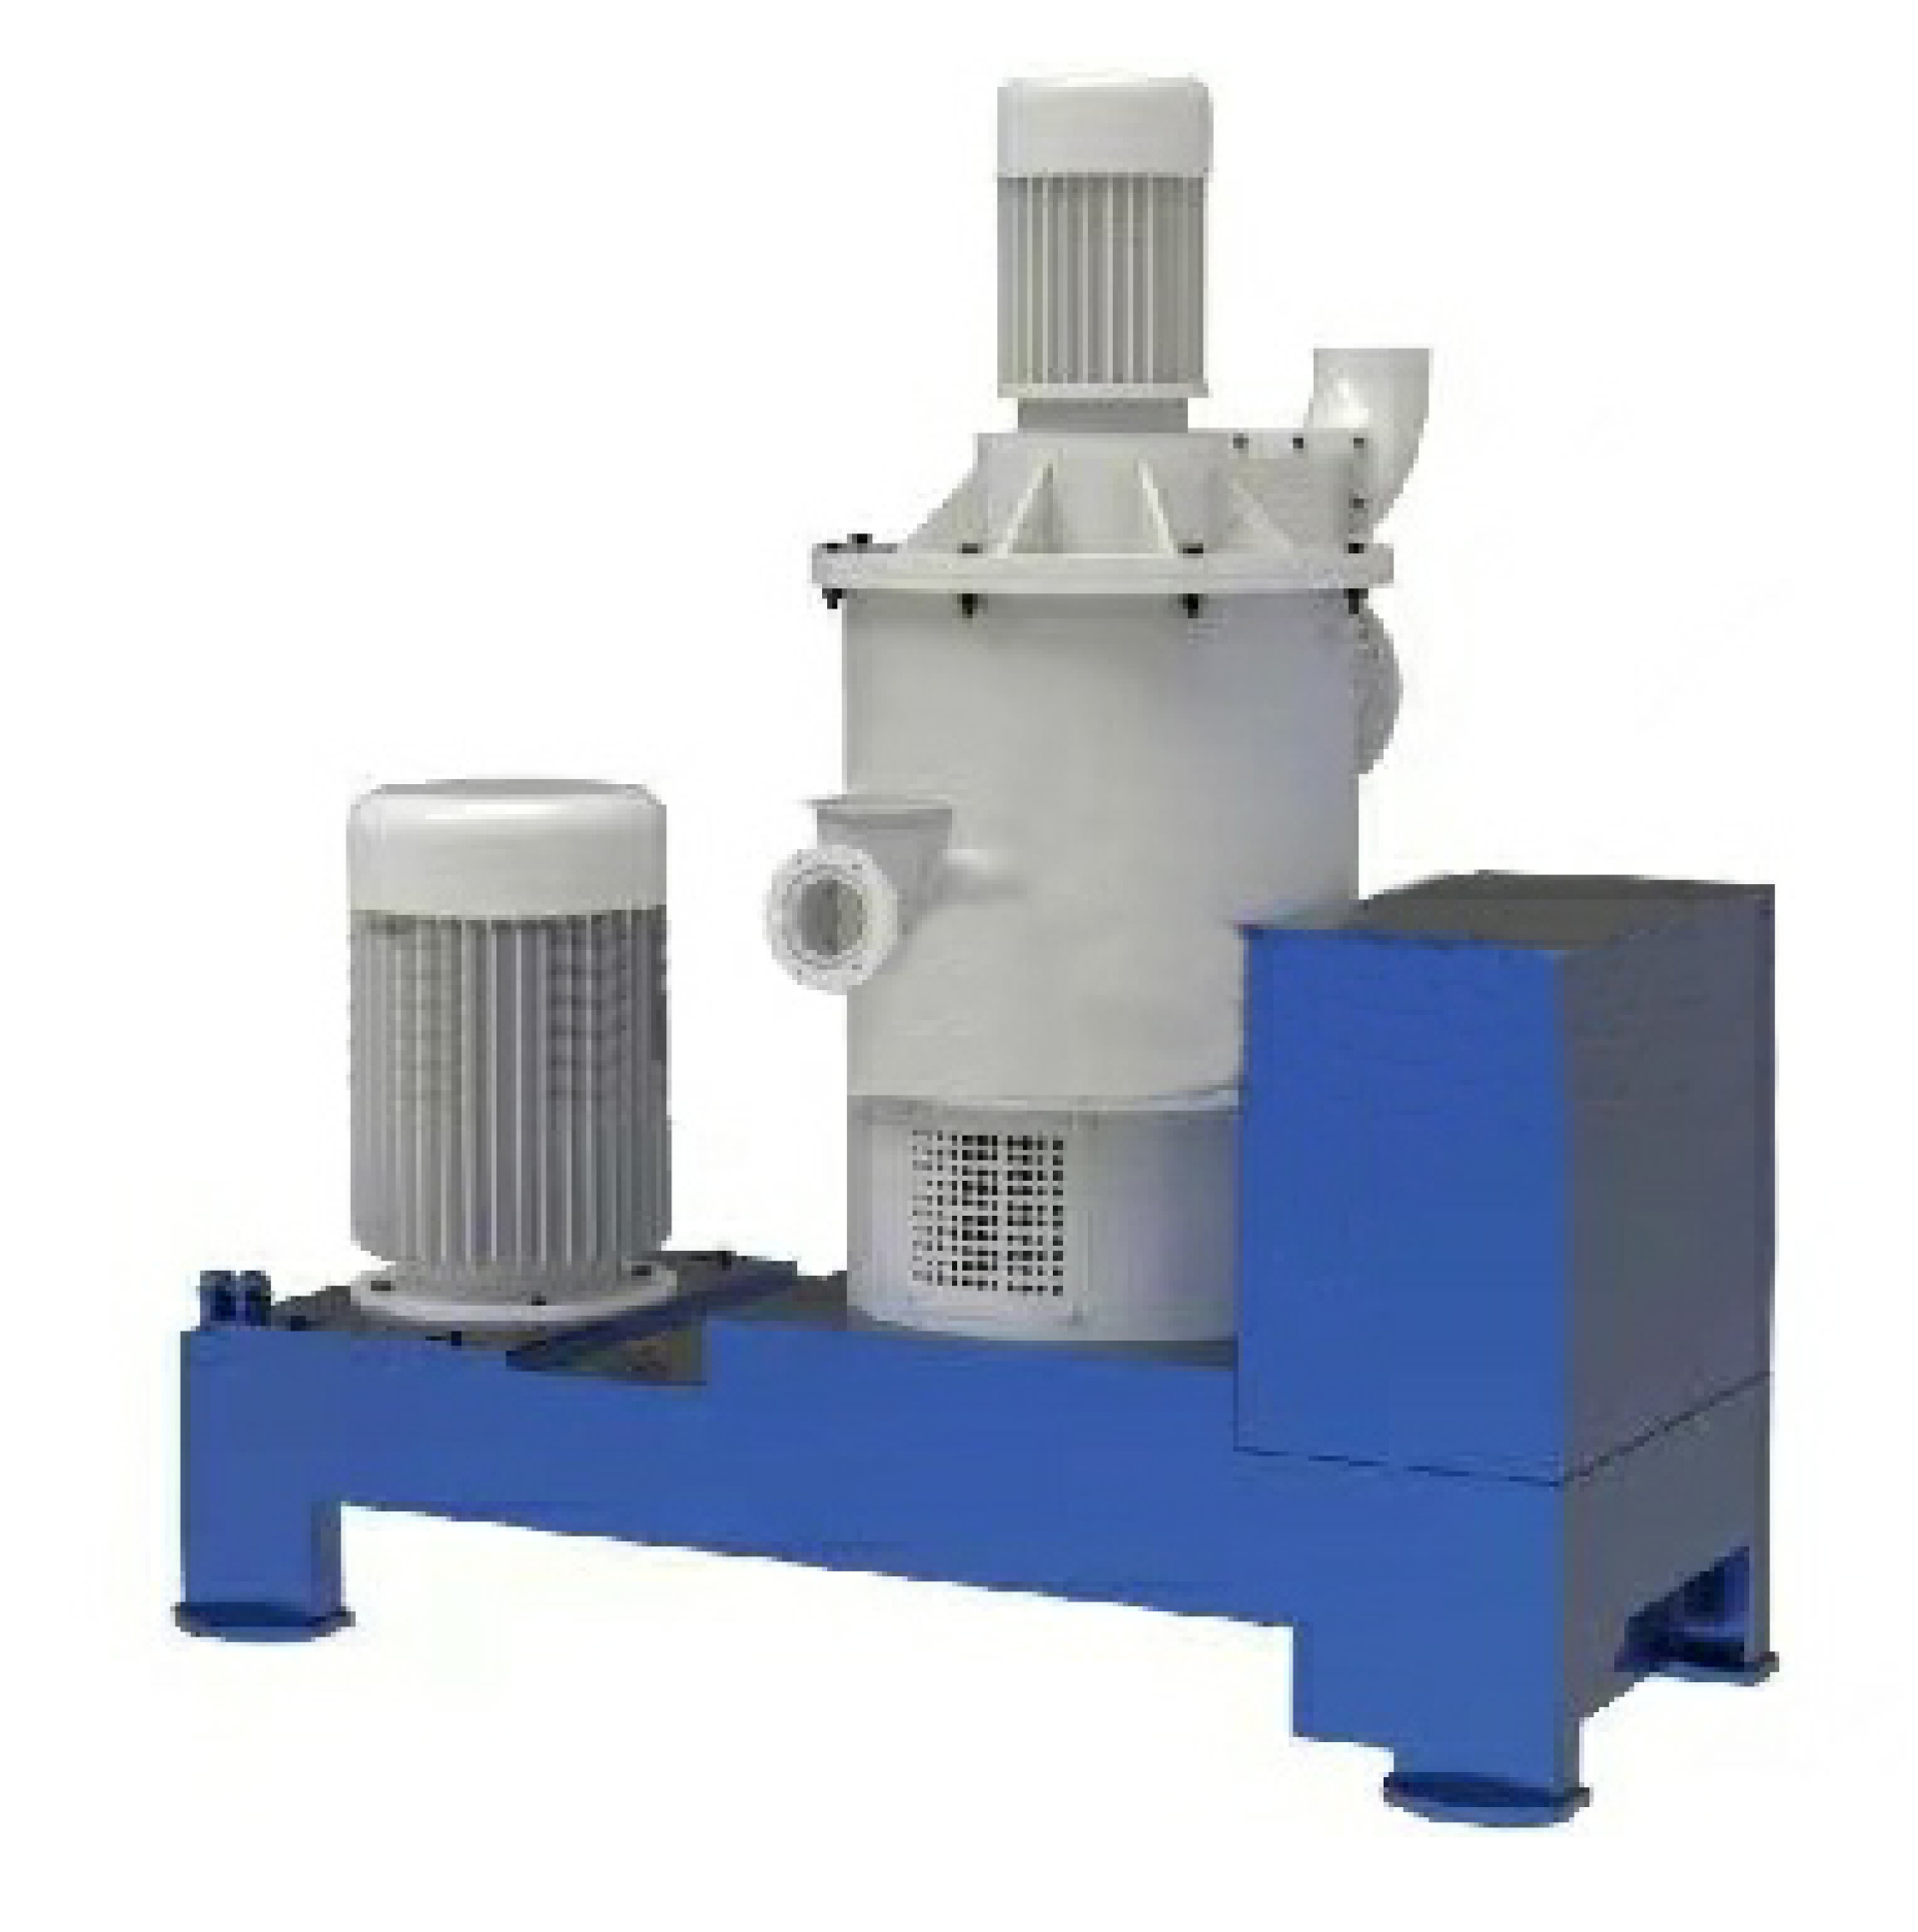 Negative Electrode Materials Batch-Type Shaping Machine